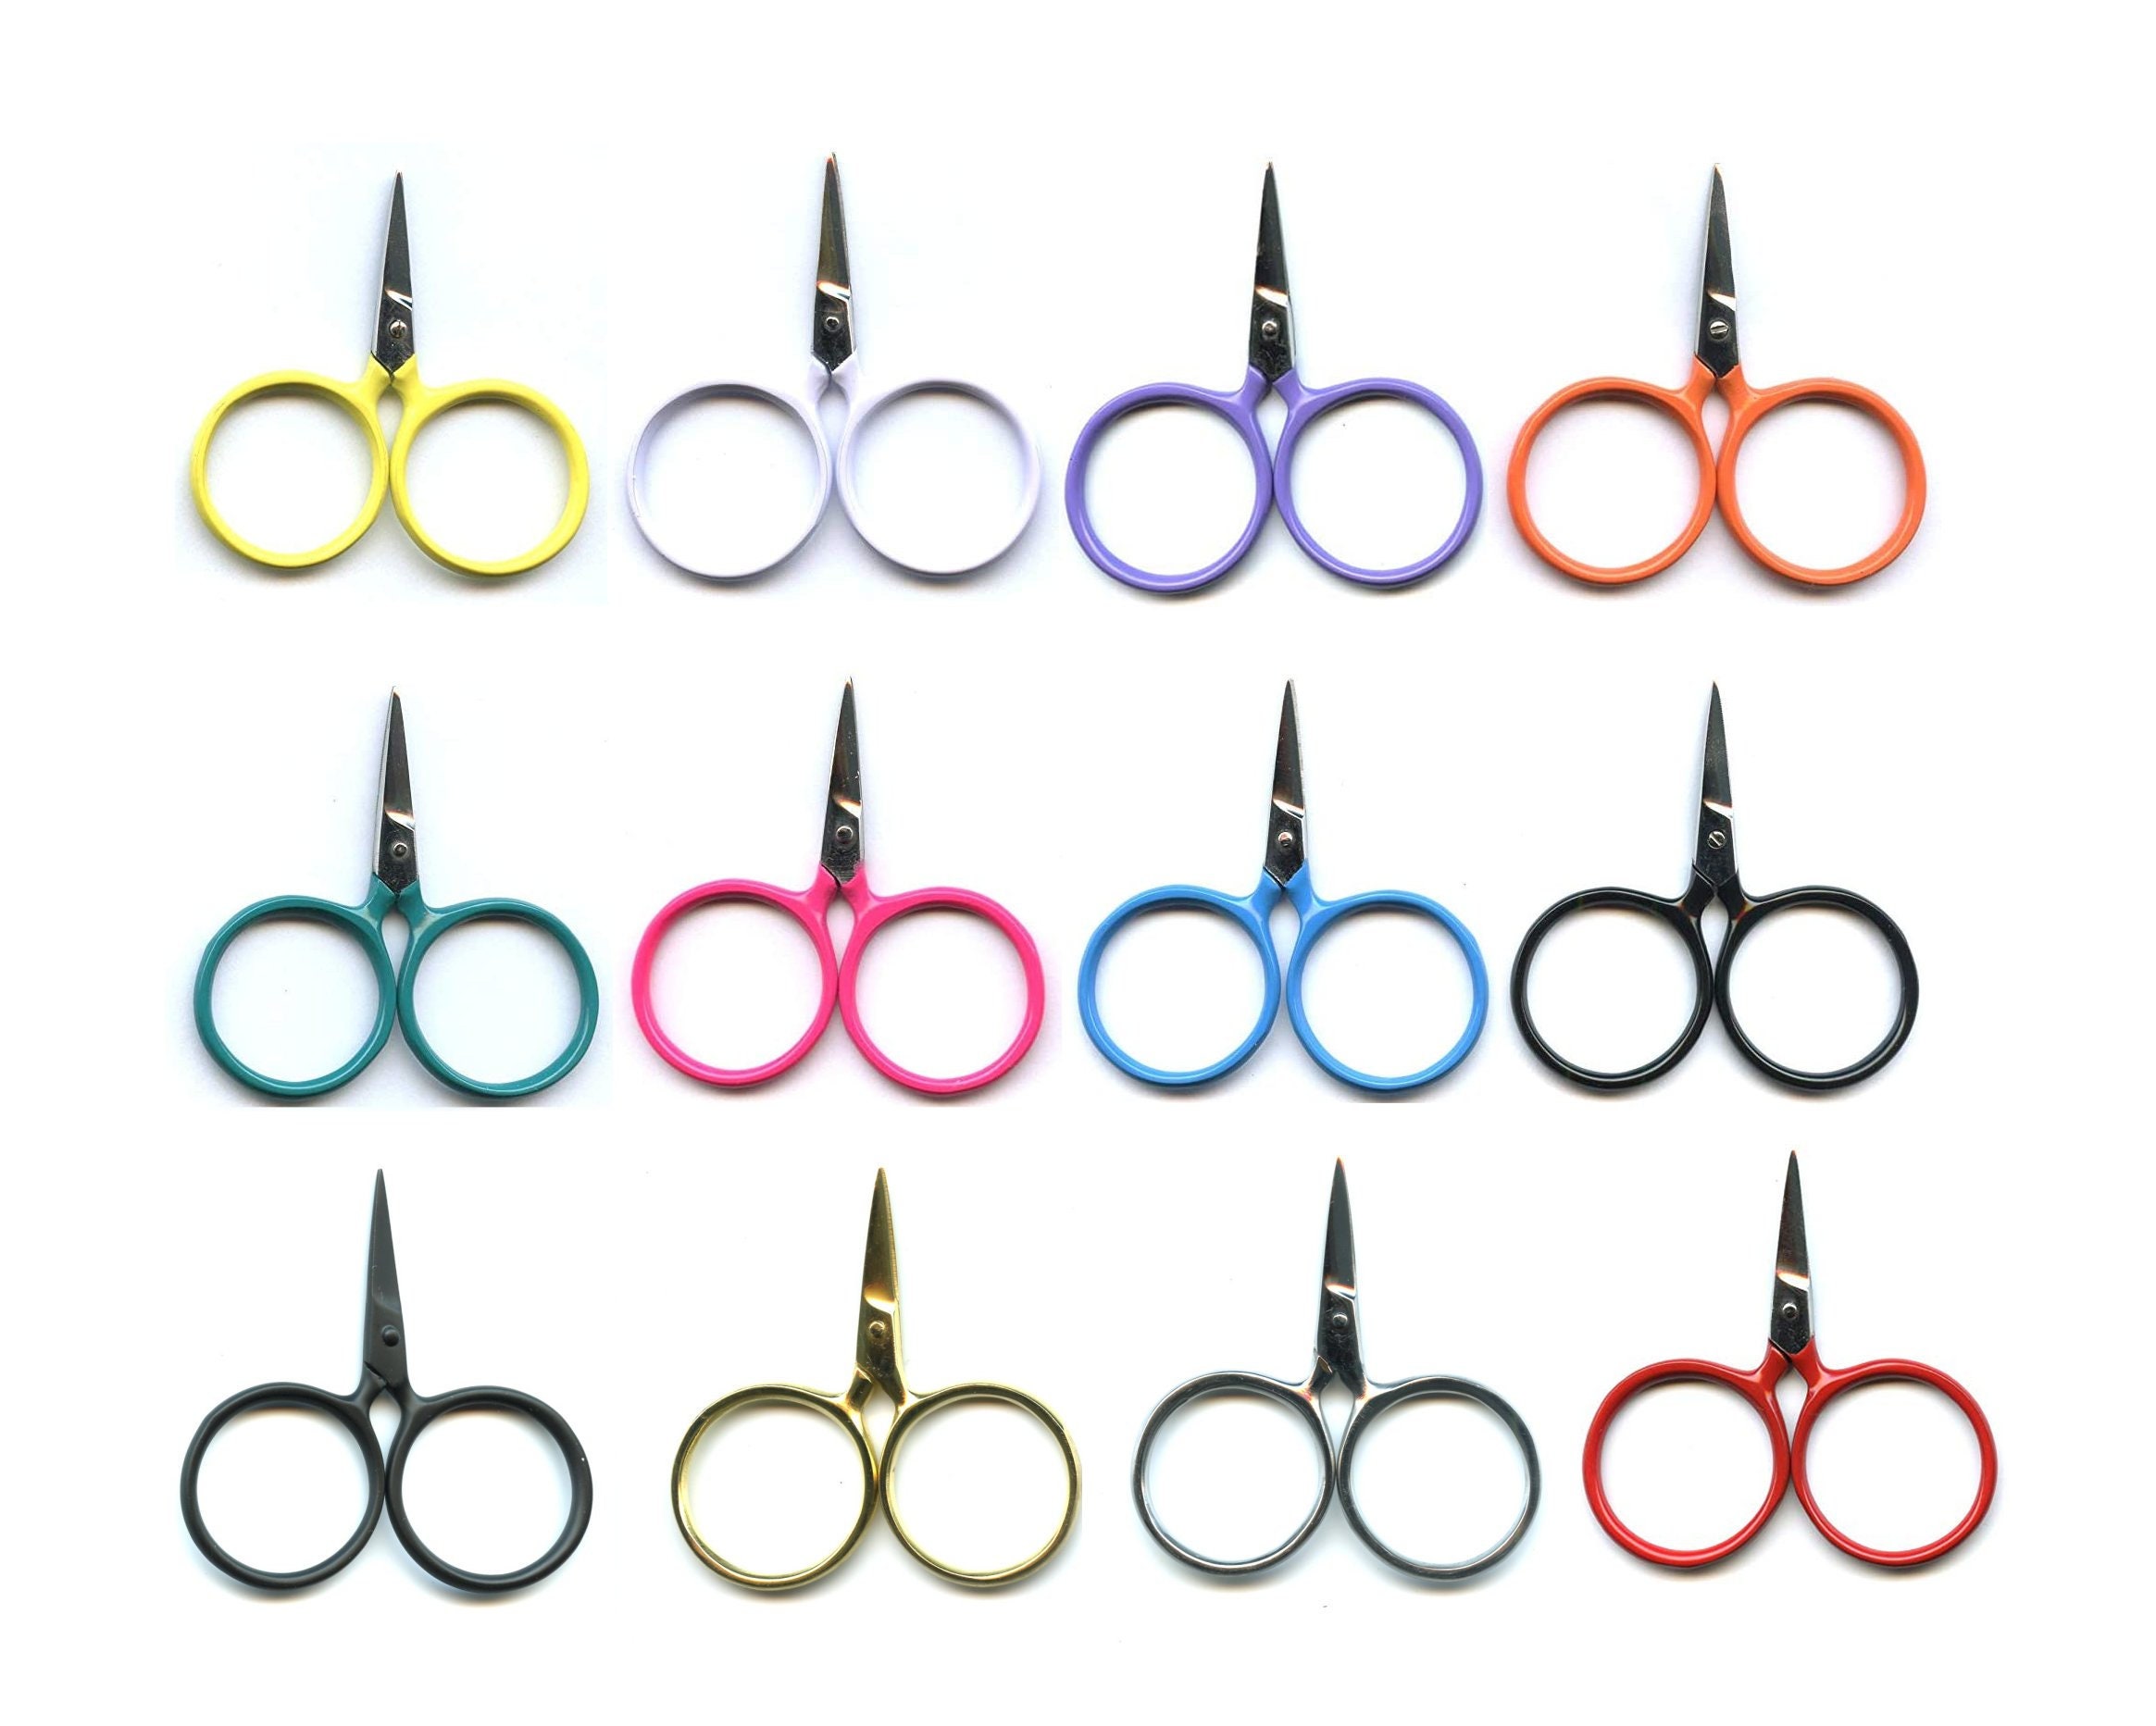 4 1/2 Thread Snips Embroidery Scissors Stainless Steel 